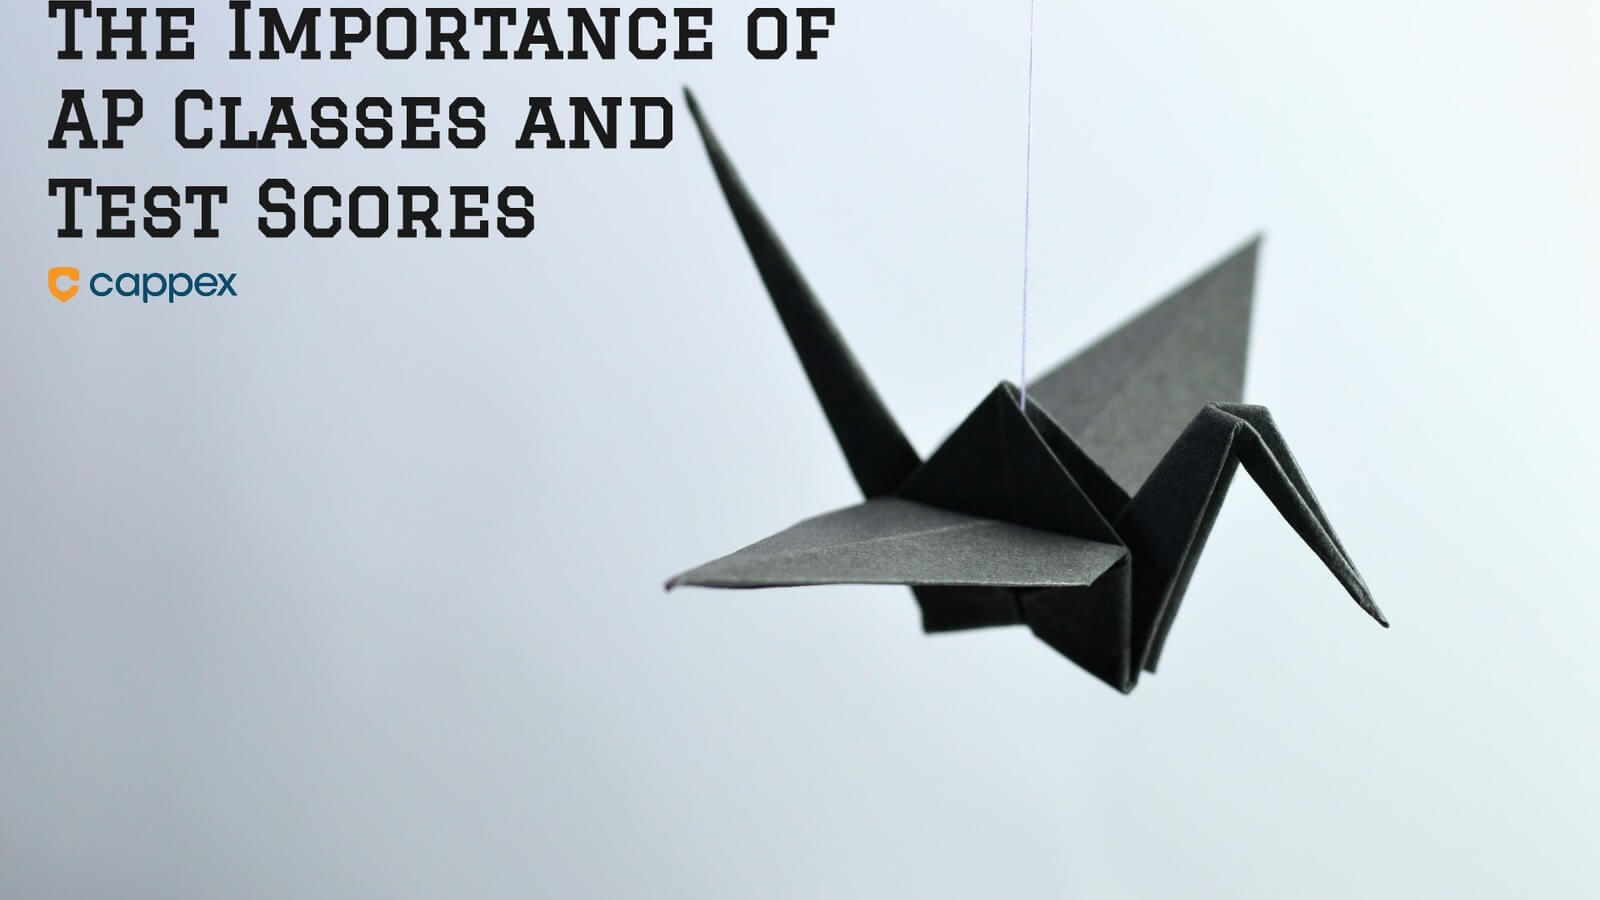 a paper swan with the graphic text of title: The Importance of AP Classes and Test Scores